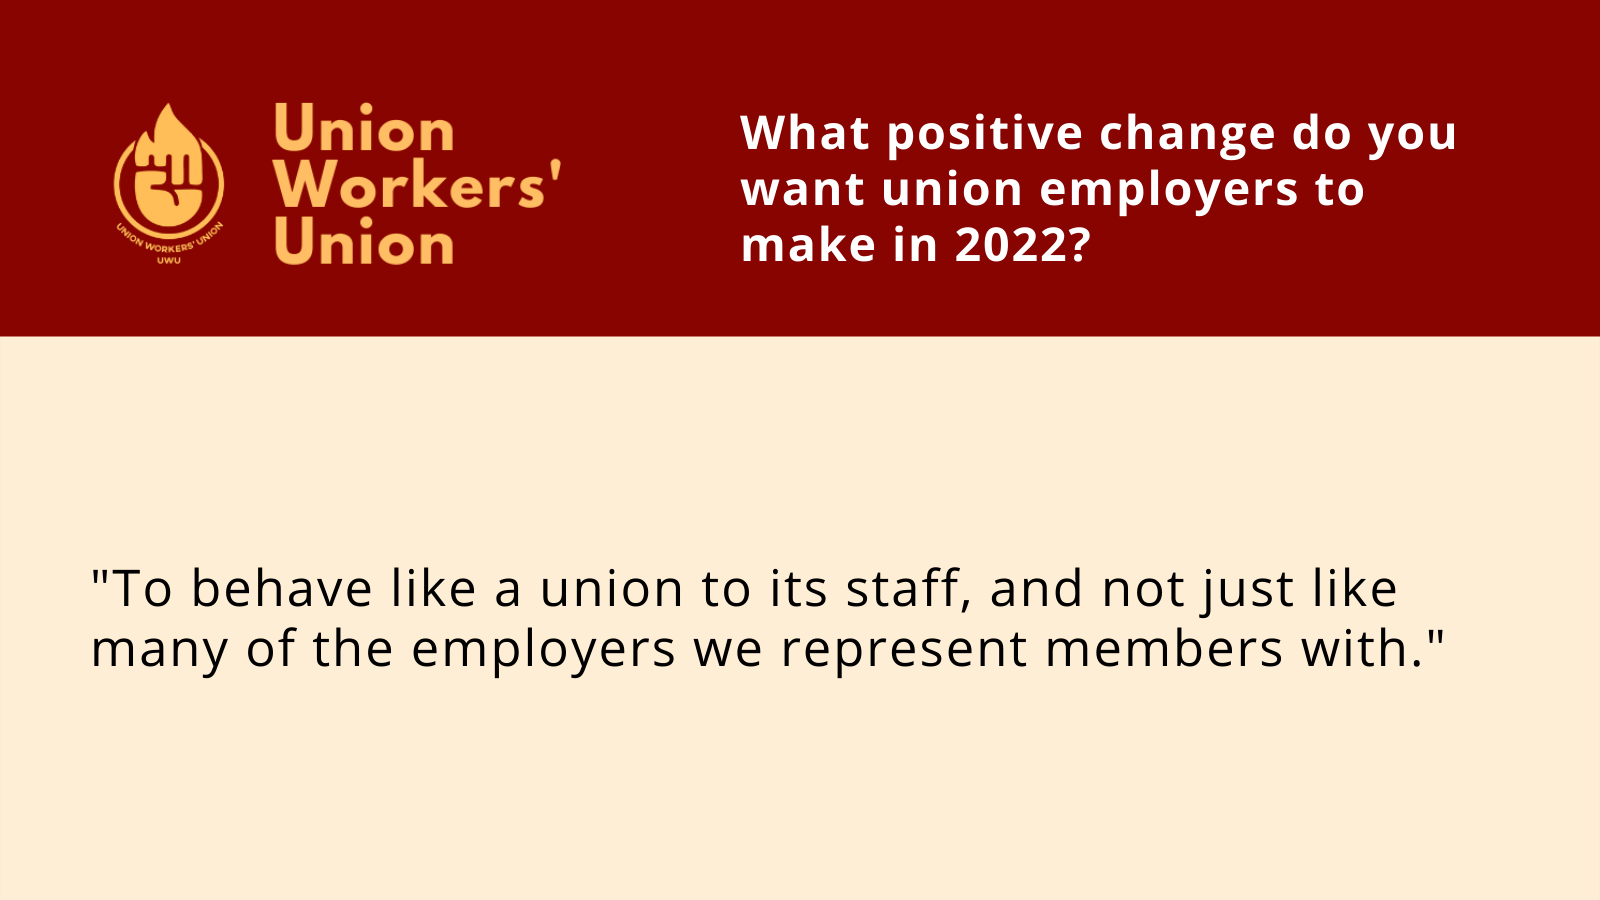 UWU logo next to the question, what positive changes do you want union employers to make in 2022? Member response: To behave like a union to its staff, and not just like many of the employers we represent members with.